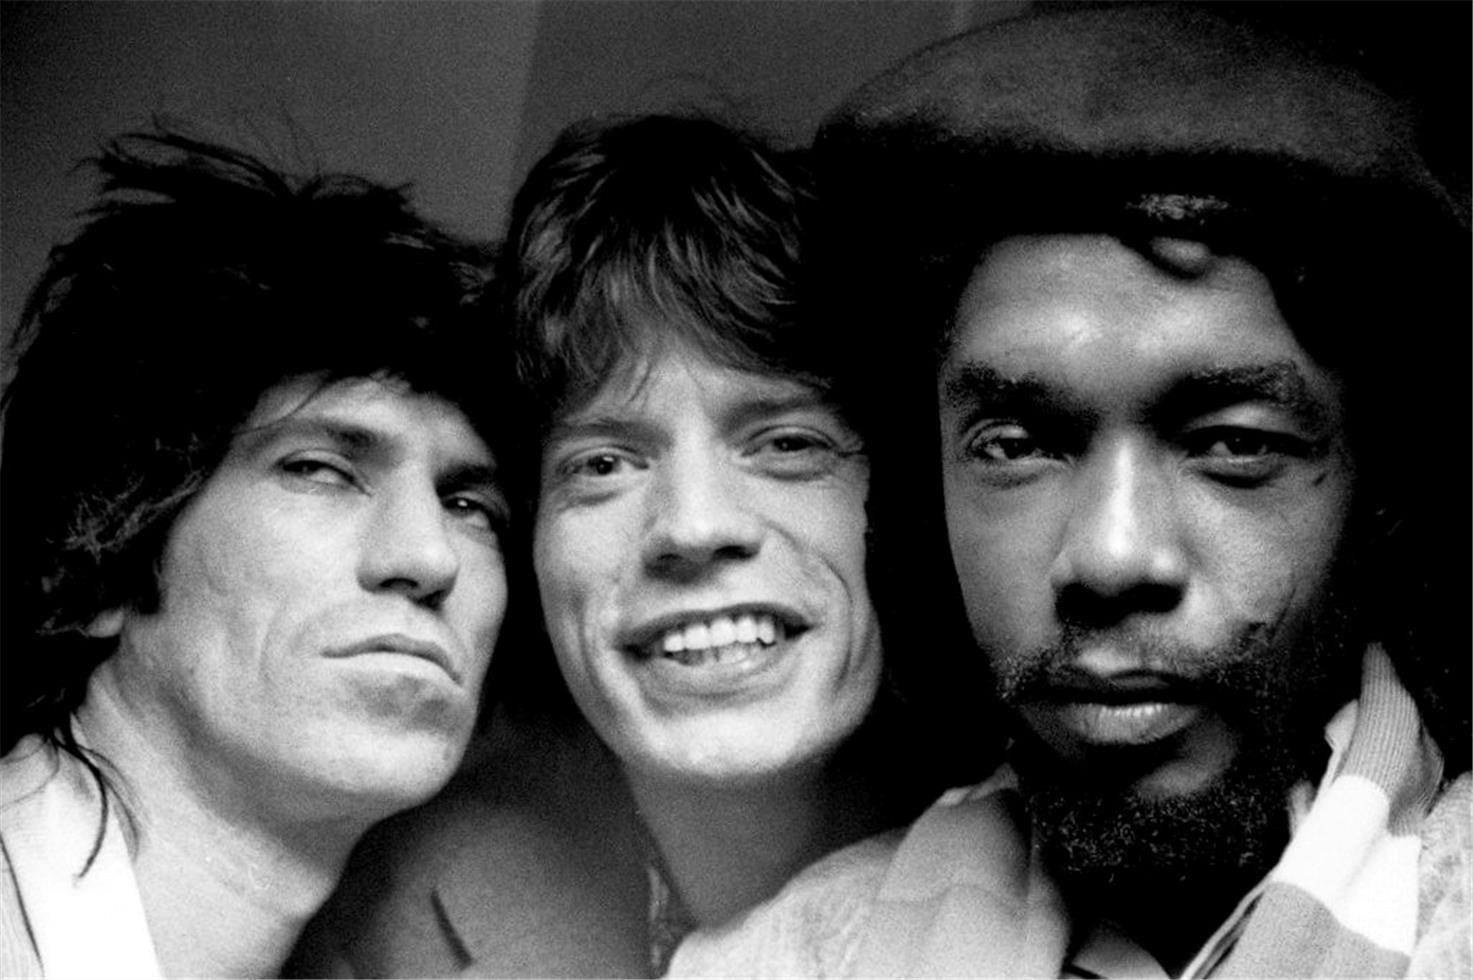 Peter Simon Black and White Photograph - Keith Richards, Mick Jagger, and Peter Tosh, 1978